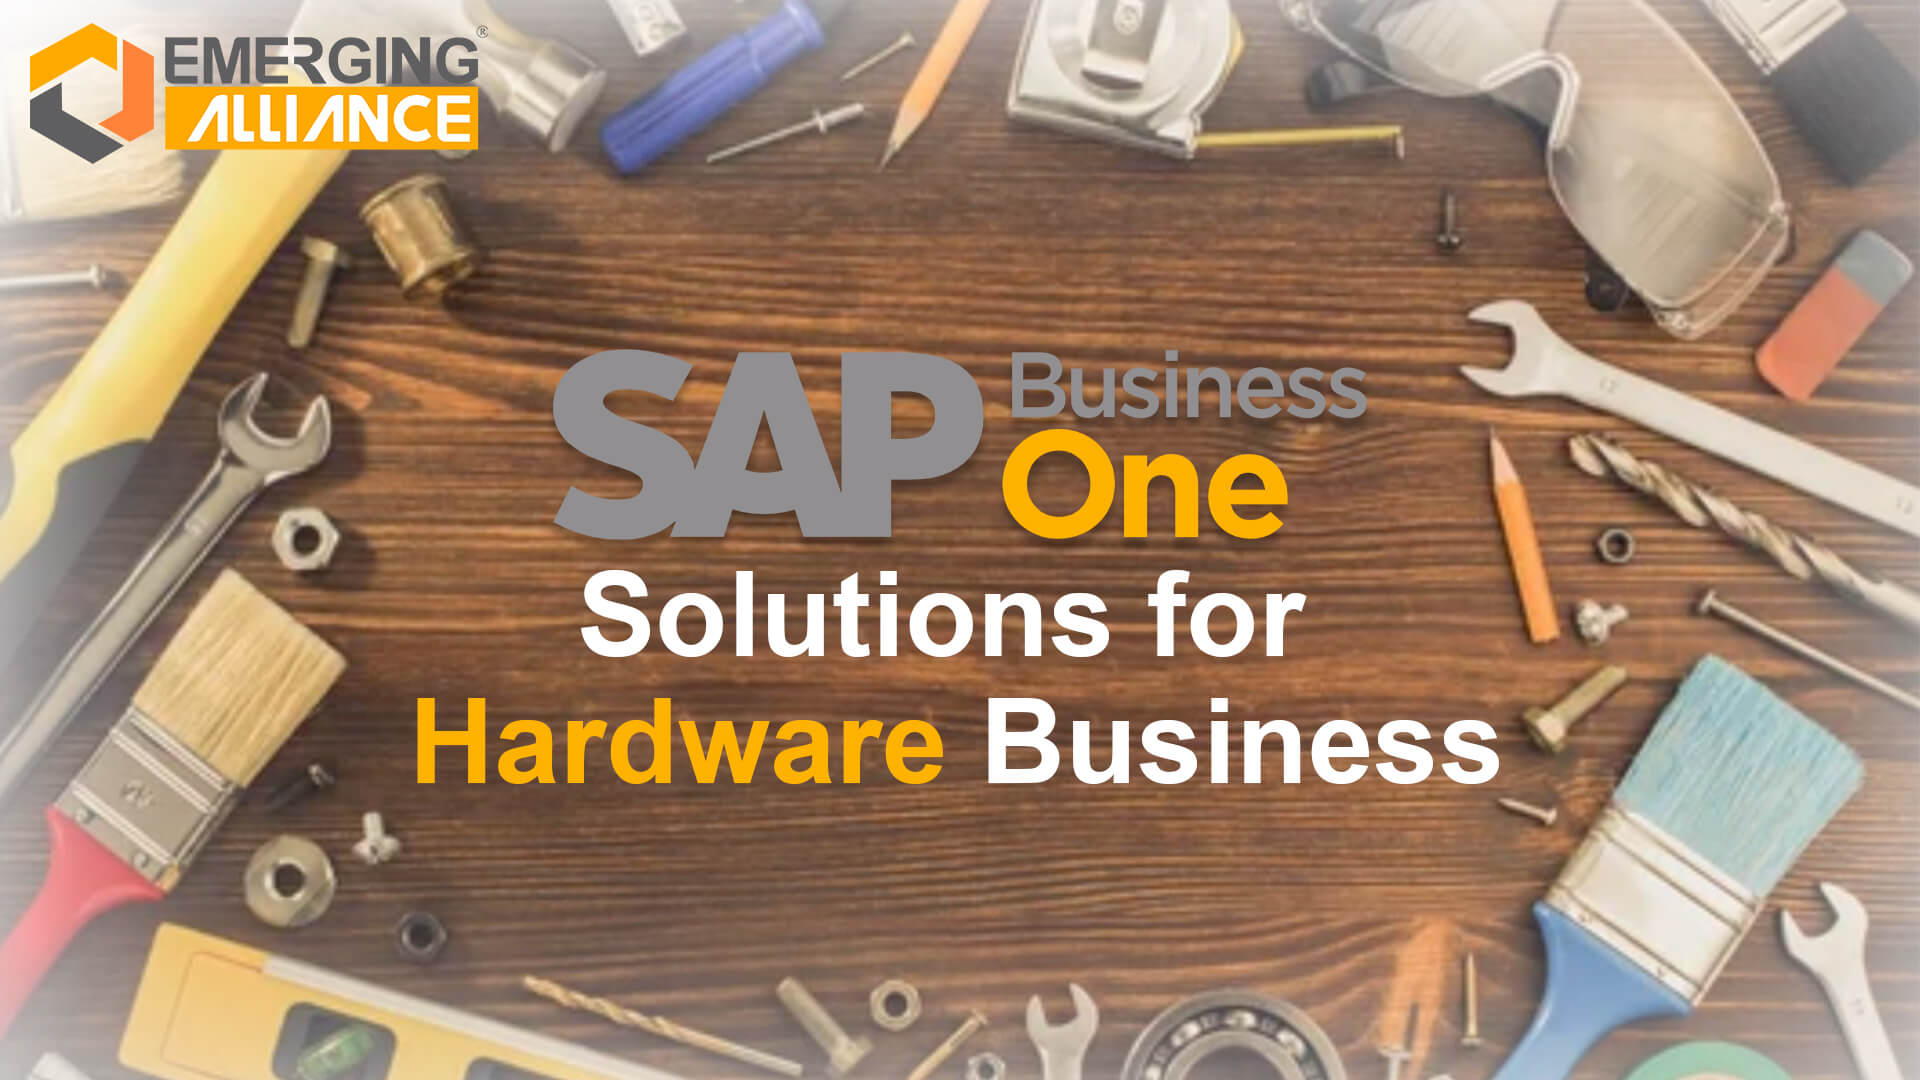 sap business one for solutions hardware business